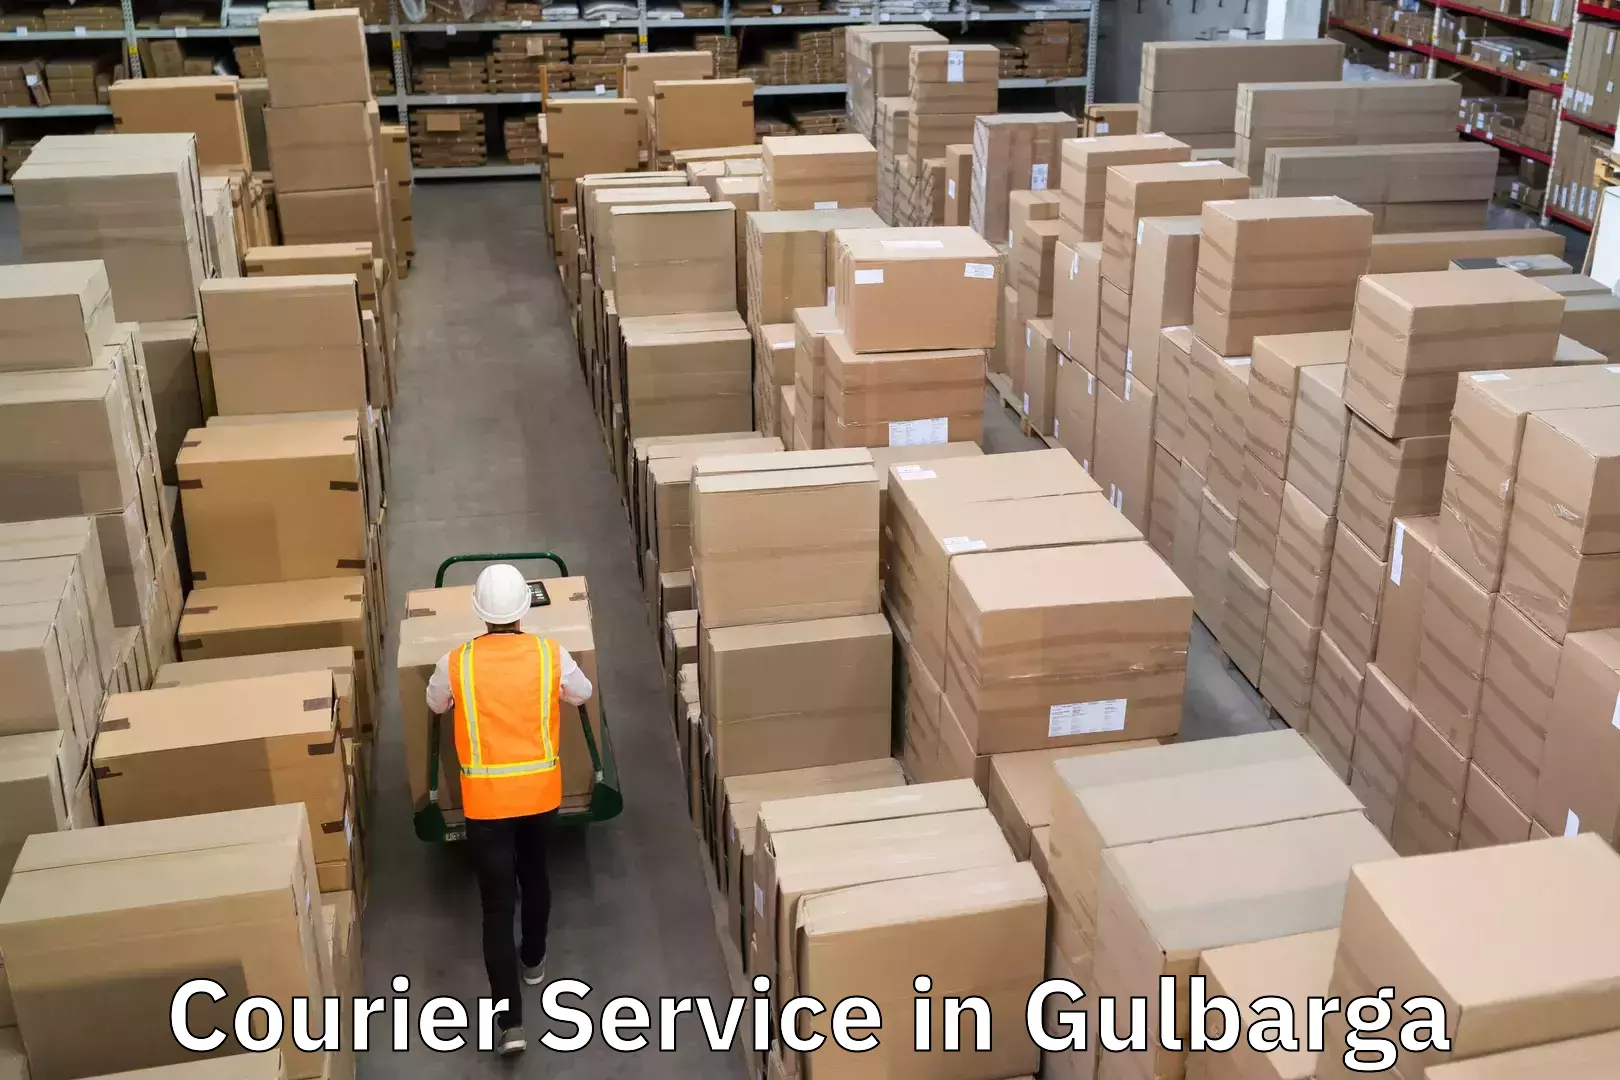 Automated parcel services in Gulbarga